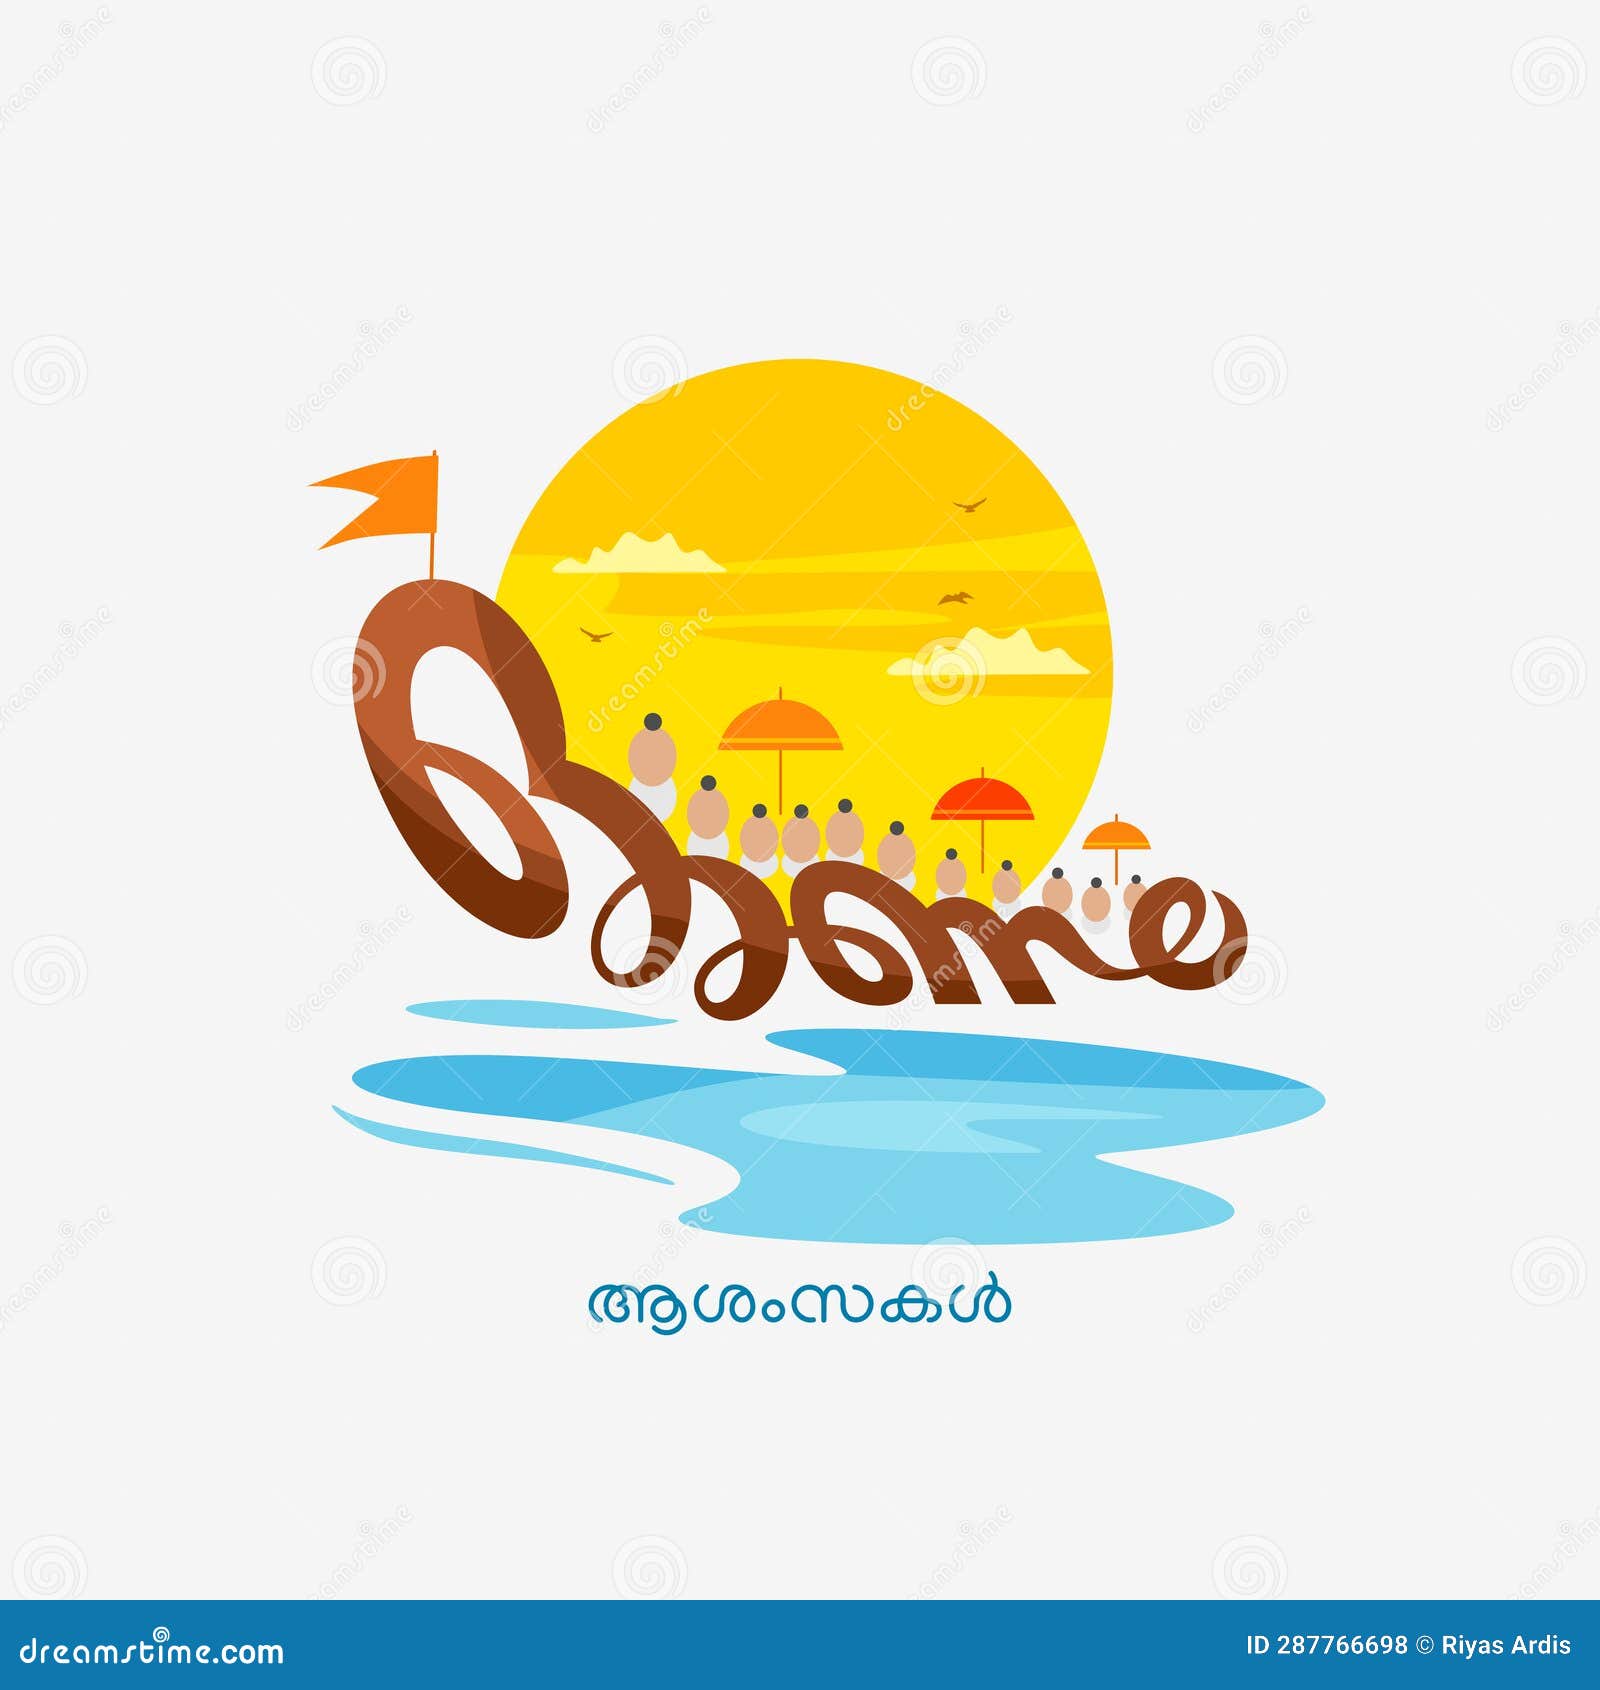 Kerala Food Vector Images (over 470)